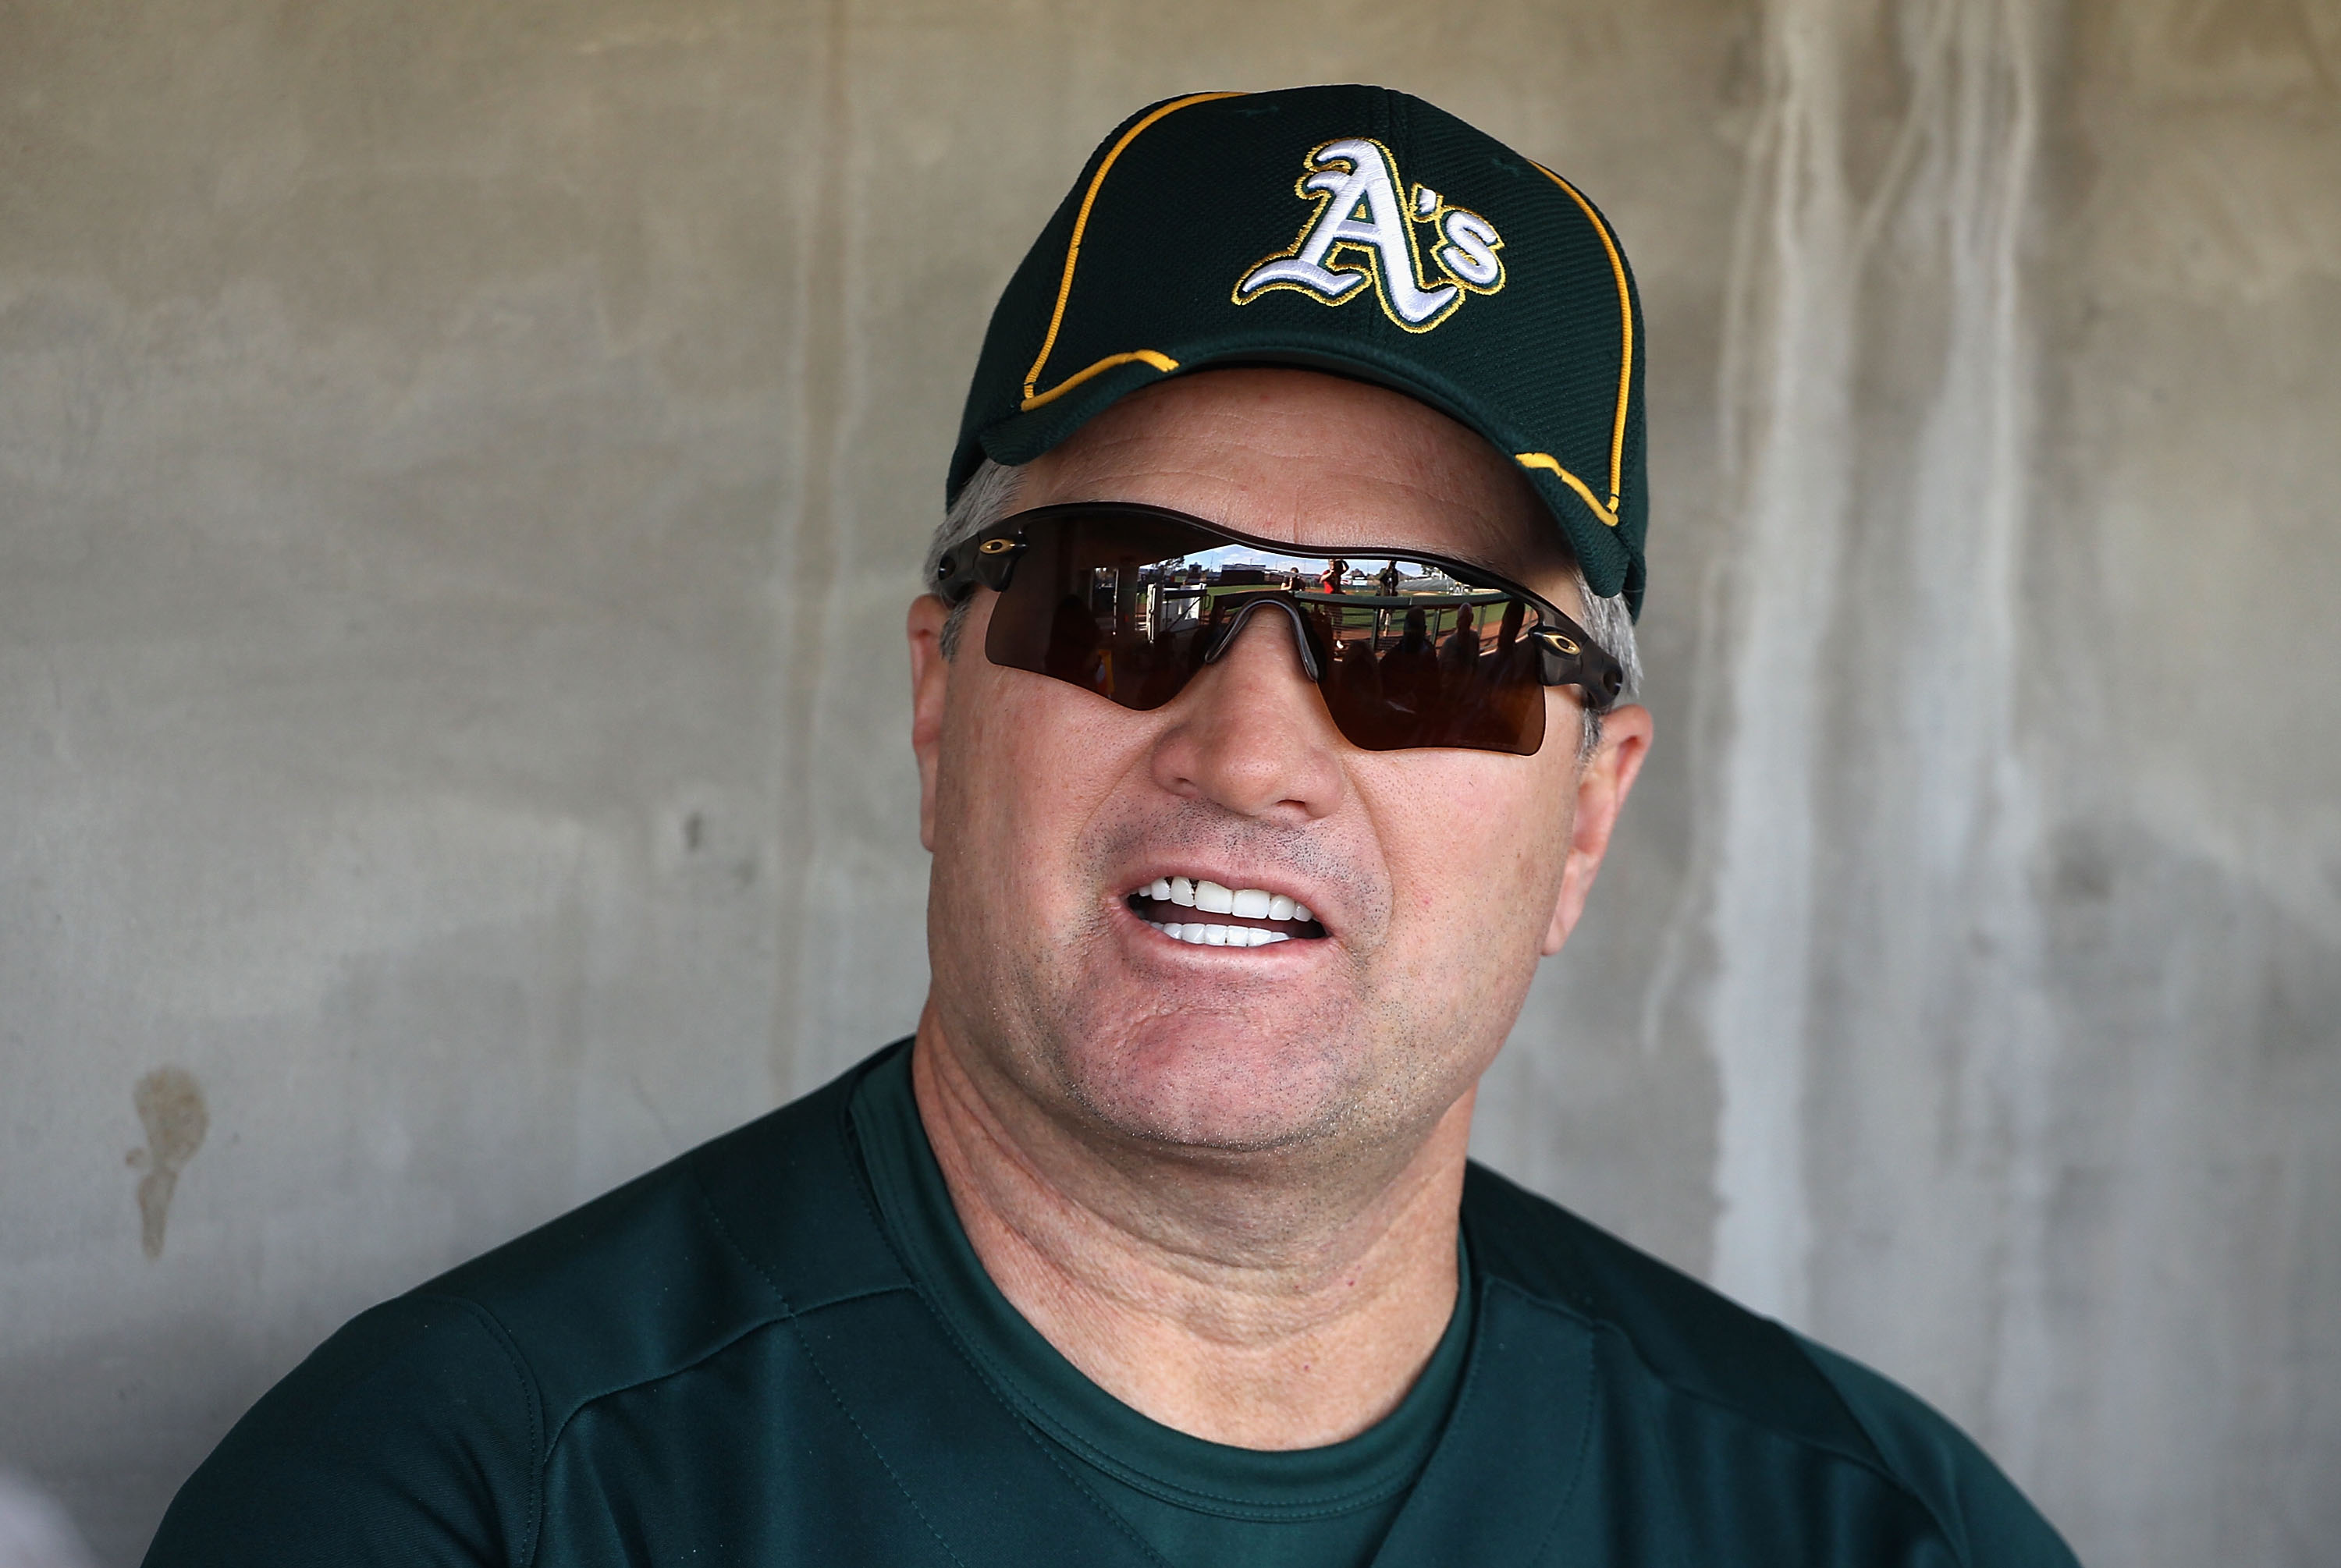 PHOENIX, AZ - FEBRUARY 16:  Head coach Bob Geren of the Oakland Athletics speaks with the media during a MLB spring training practice at Phoenix Municipal Stadium on February 16, 2011 in Phoenix, Arizona.  (Photo by Christian Petersen/Getty Images)